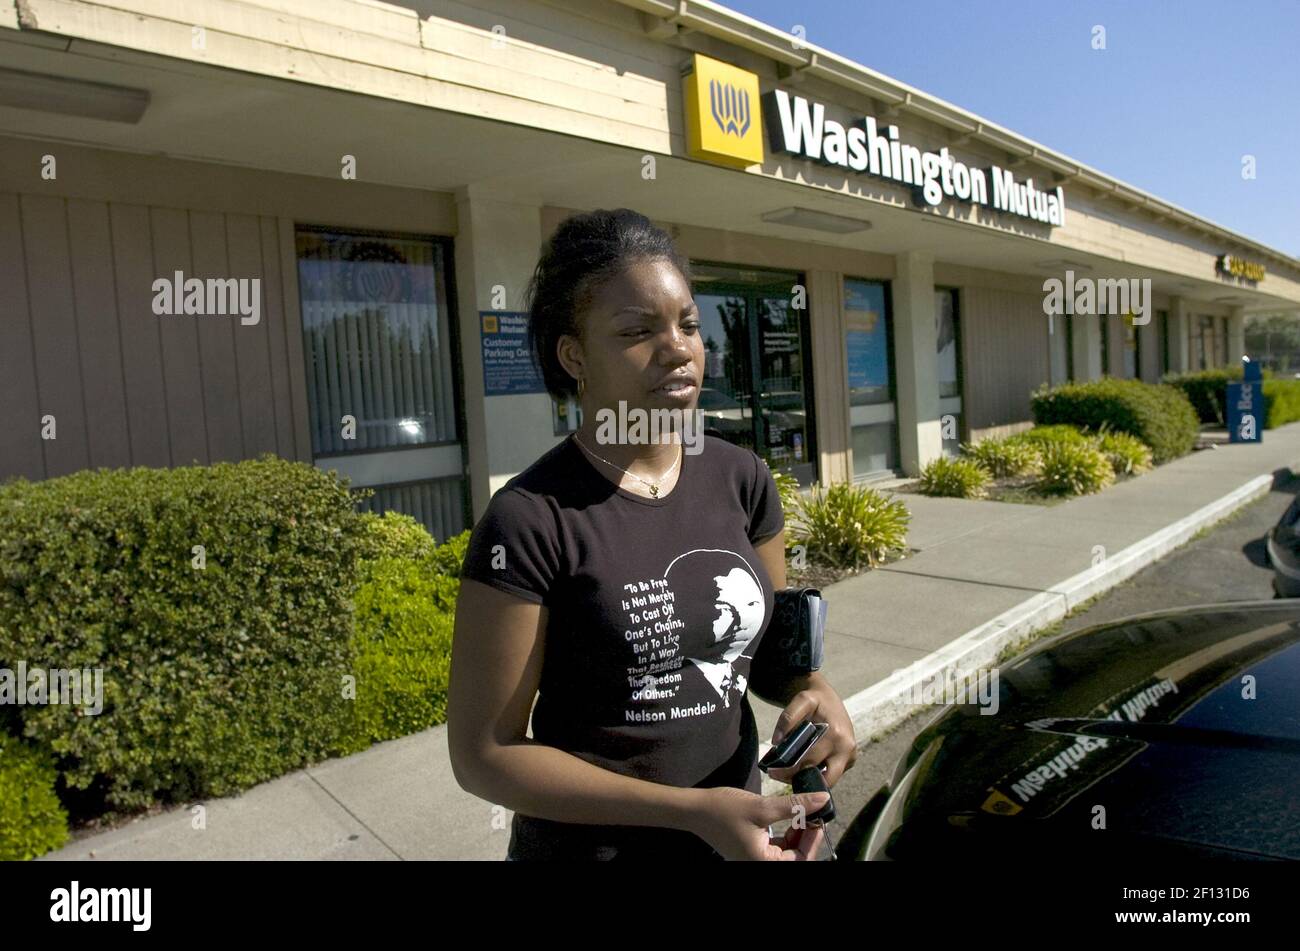 Marcellina Amonoo comes out of Washington Mutual Bank, on Friday, September 26, 2008. The bank has agreed to sell off its assets and some of its branches in Sacramento, California. (Photo by Lezlie Sterling/Sacramento Bee/MCT/Sipa USA) Stock Photo